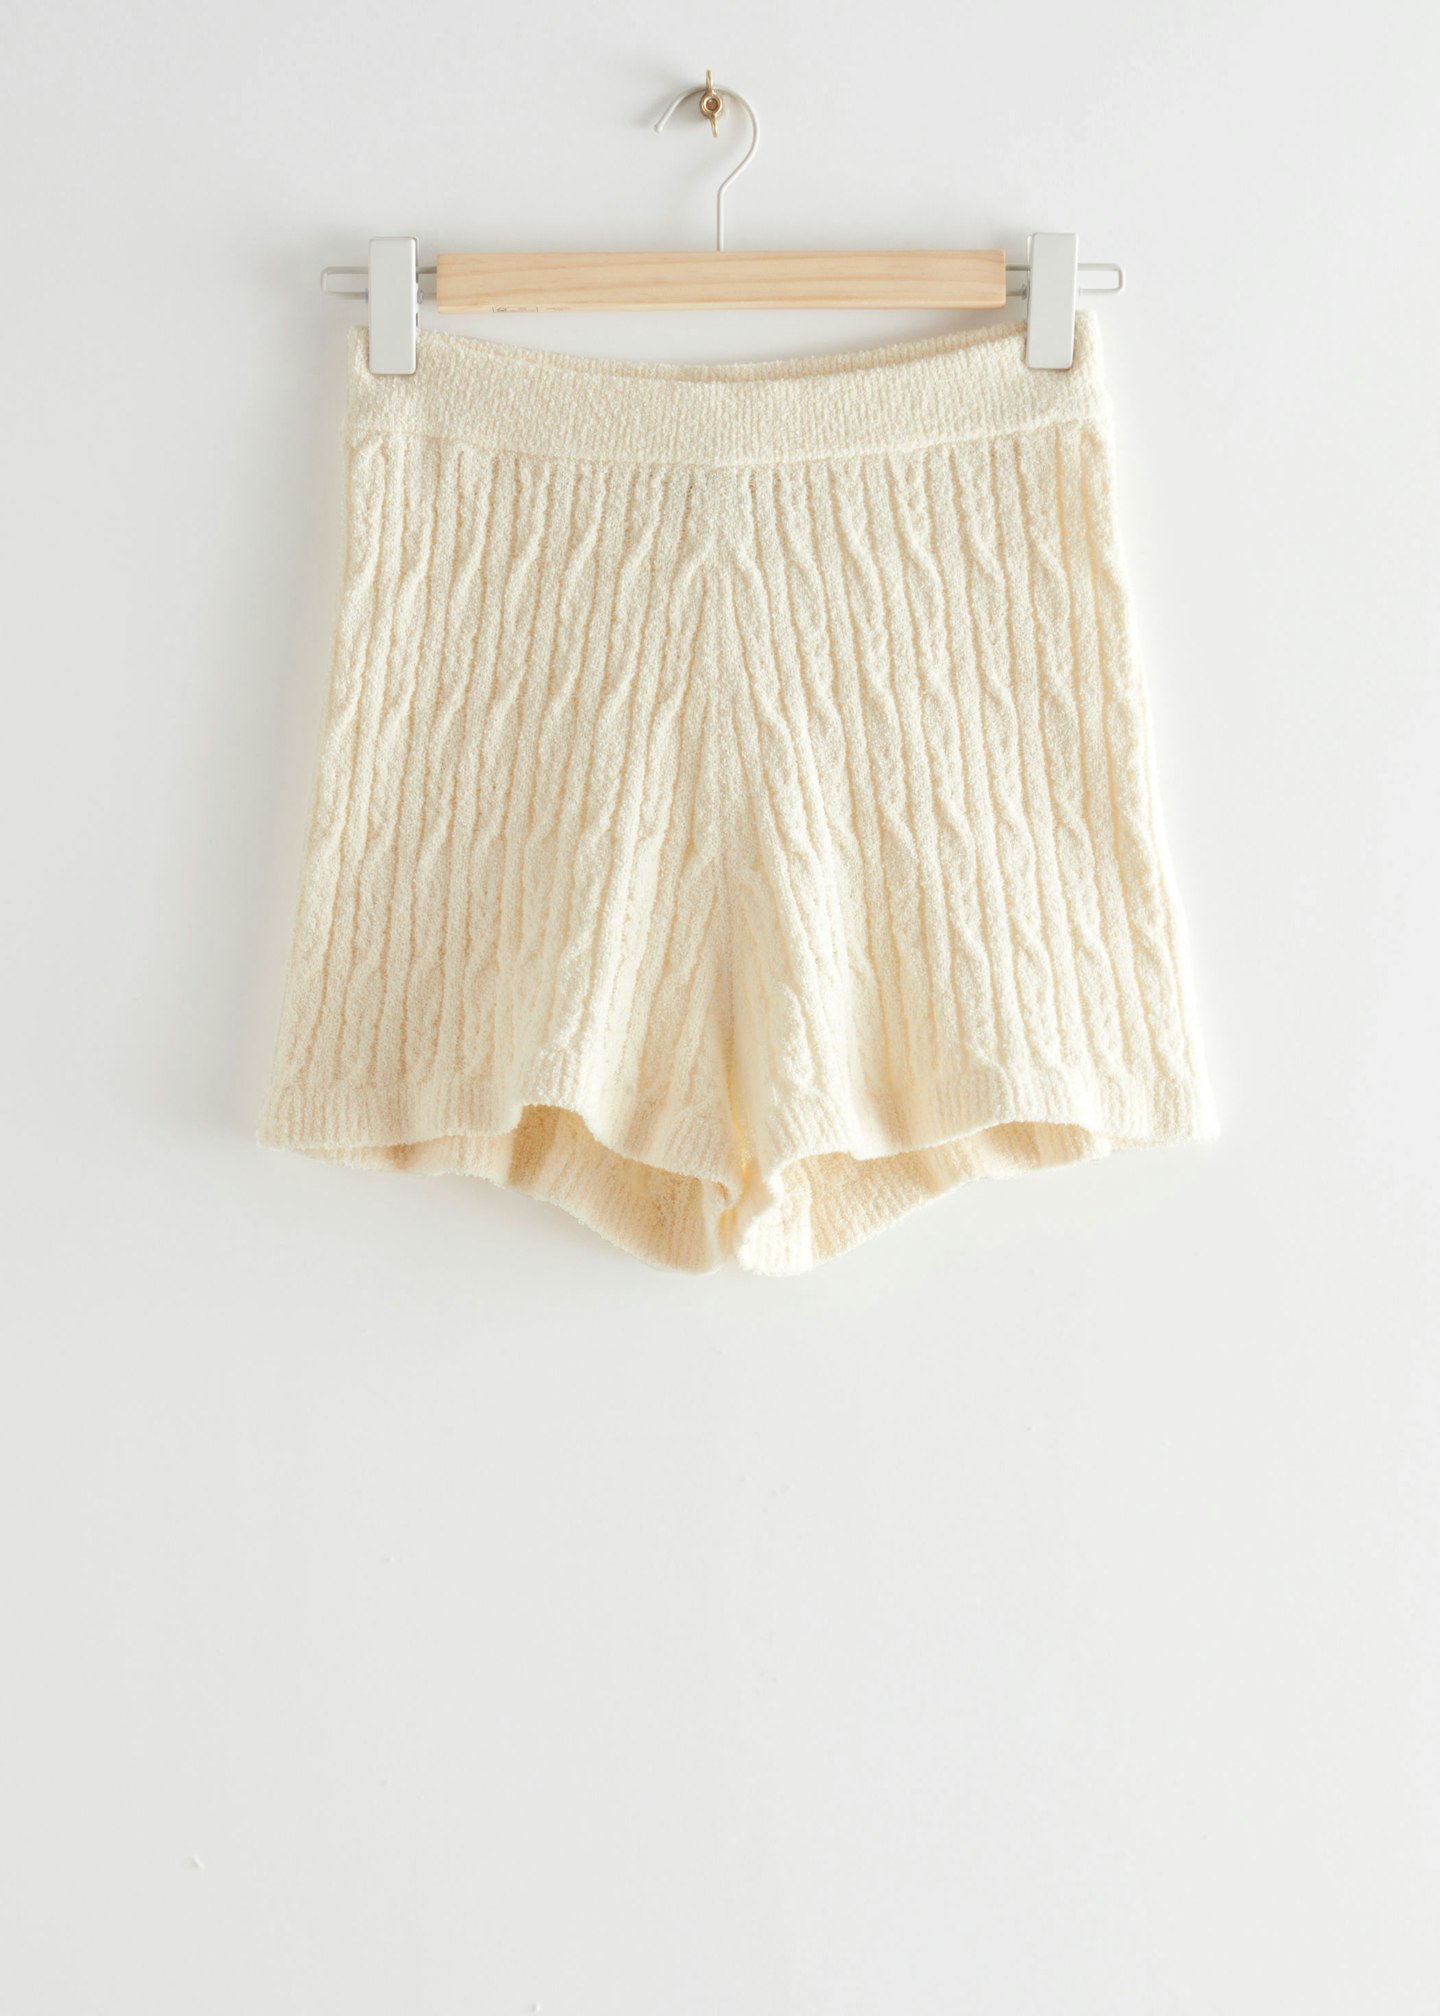 & Other Stories, Cable-Knit Shorts, £45